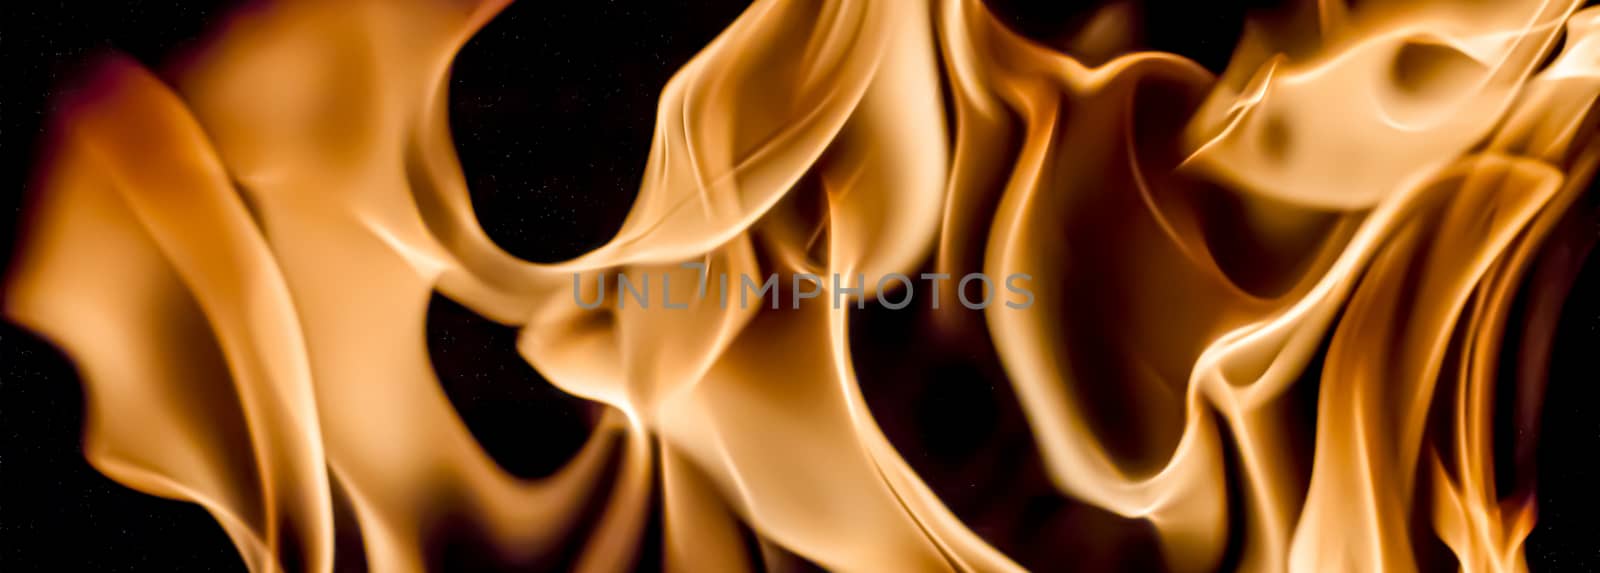 Fire flames as nature element and abstract background, minimal design